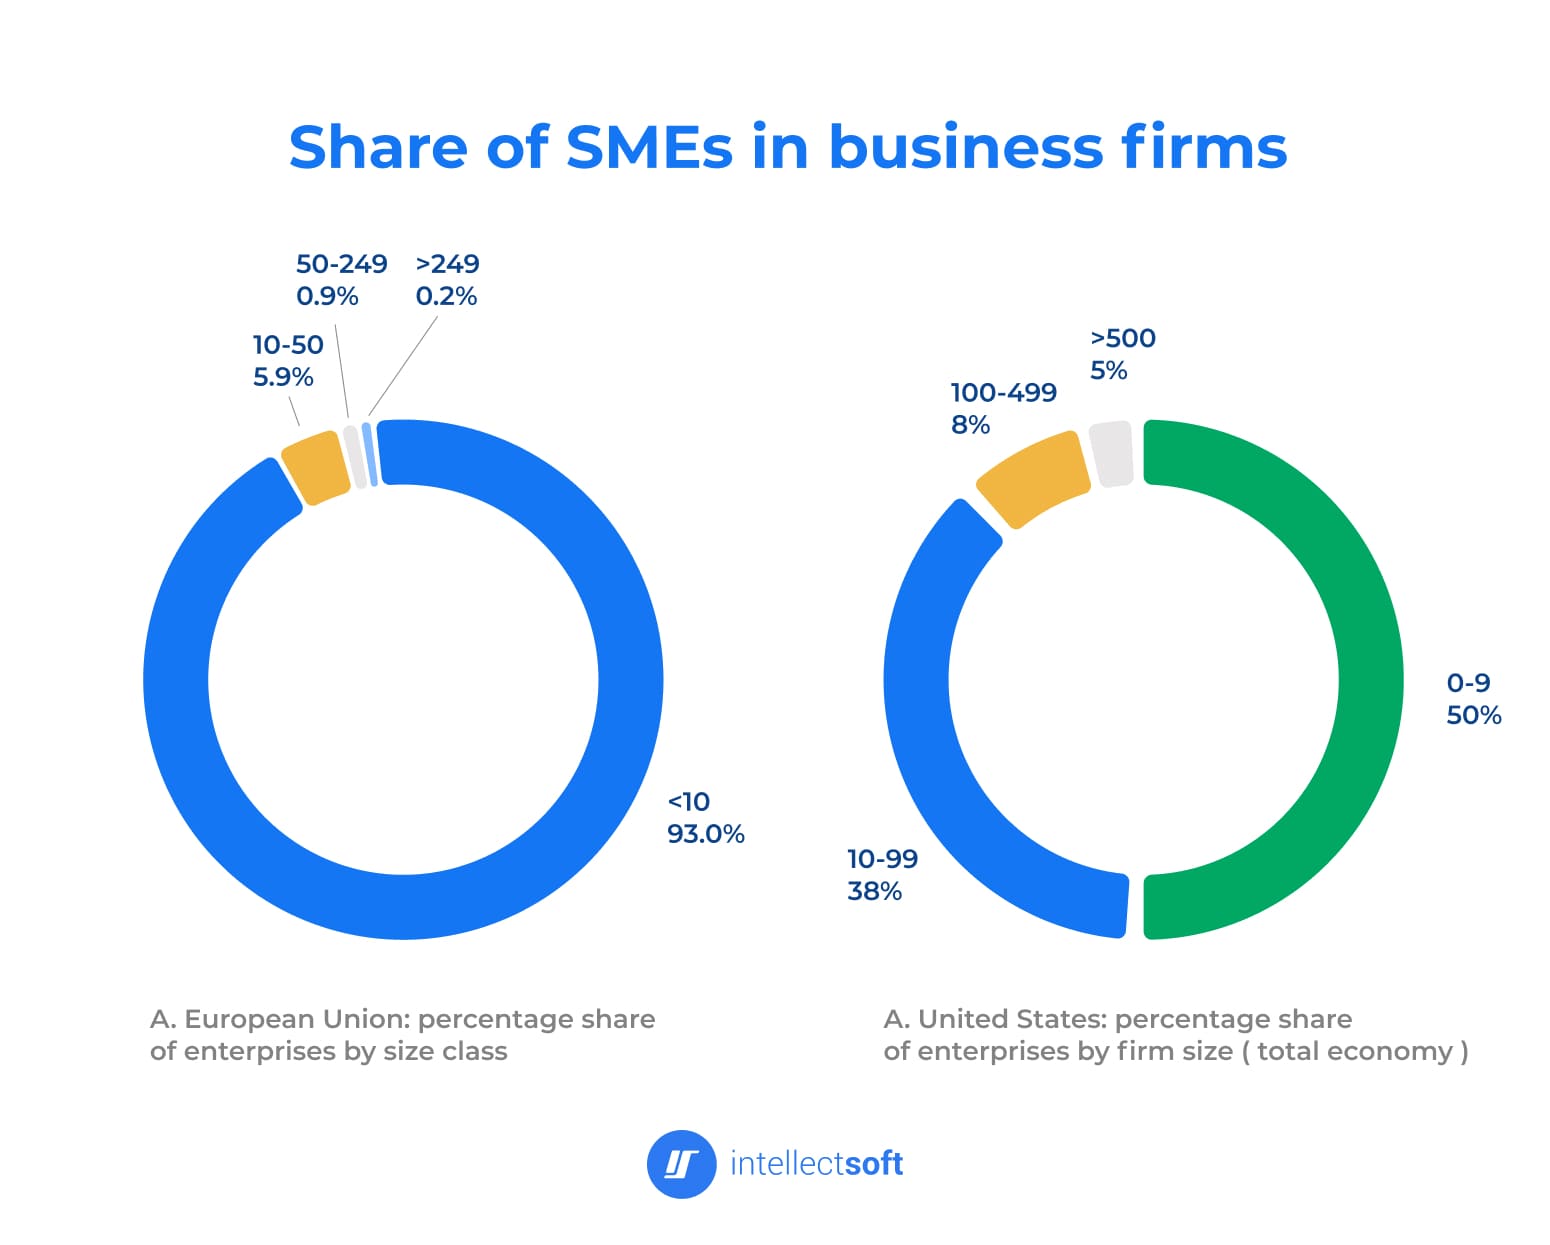 Diagram of the share of SMEs in business firms in the European Union and the United States, in percentage.